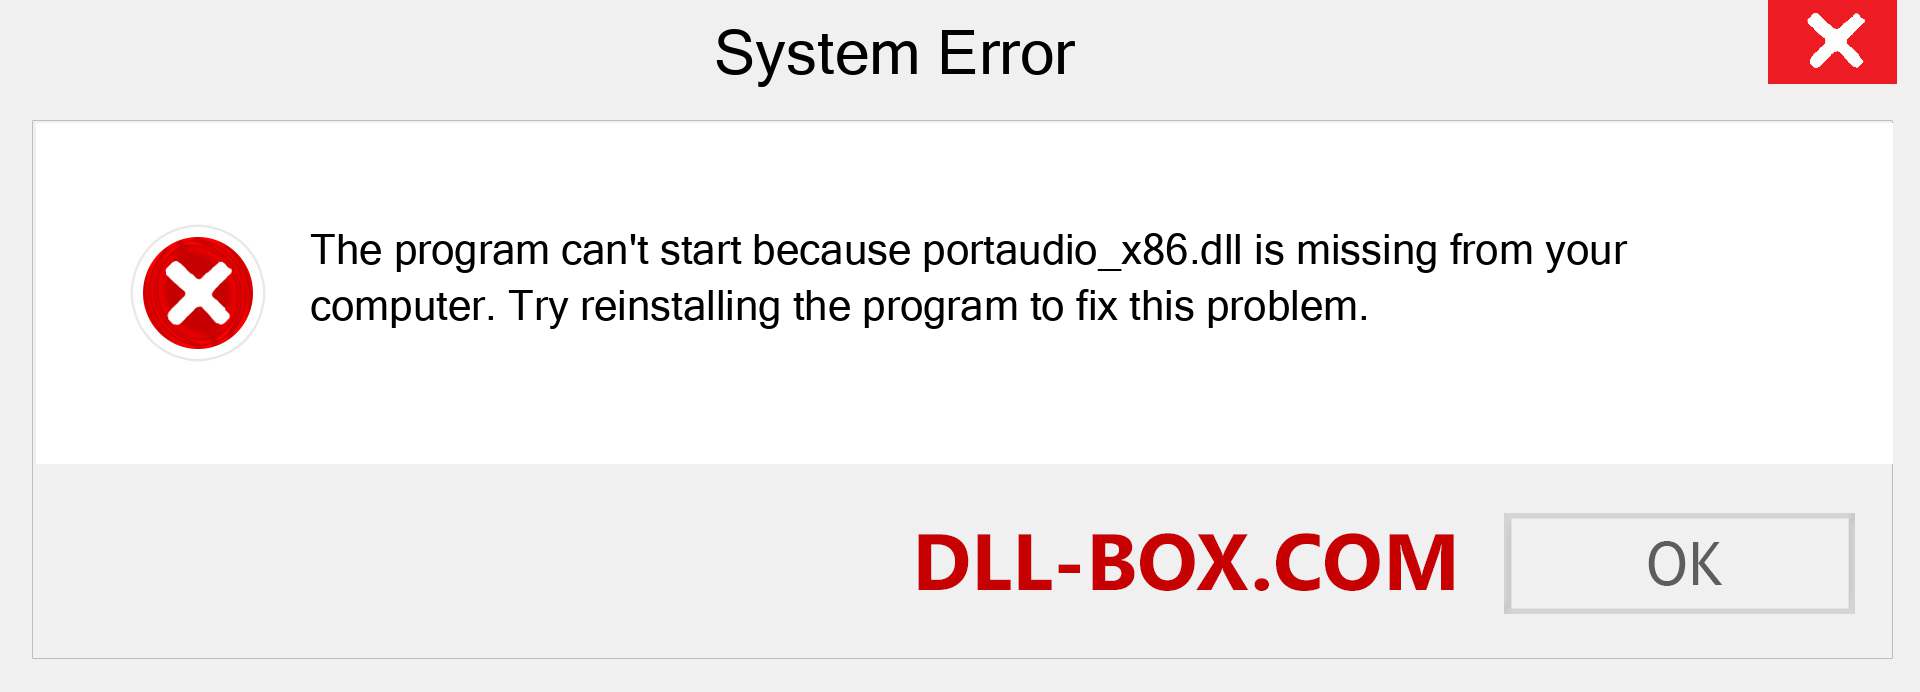  portaudio_x86.dll file is missing?. Download for Windows 7, 8, 10 - Fix  portaudio_x86 dll Missing Error on Windows, photos, images